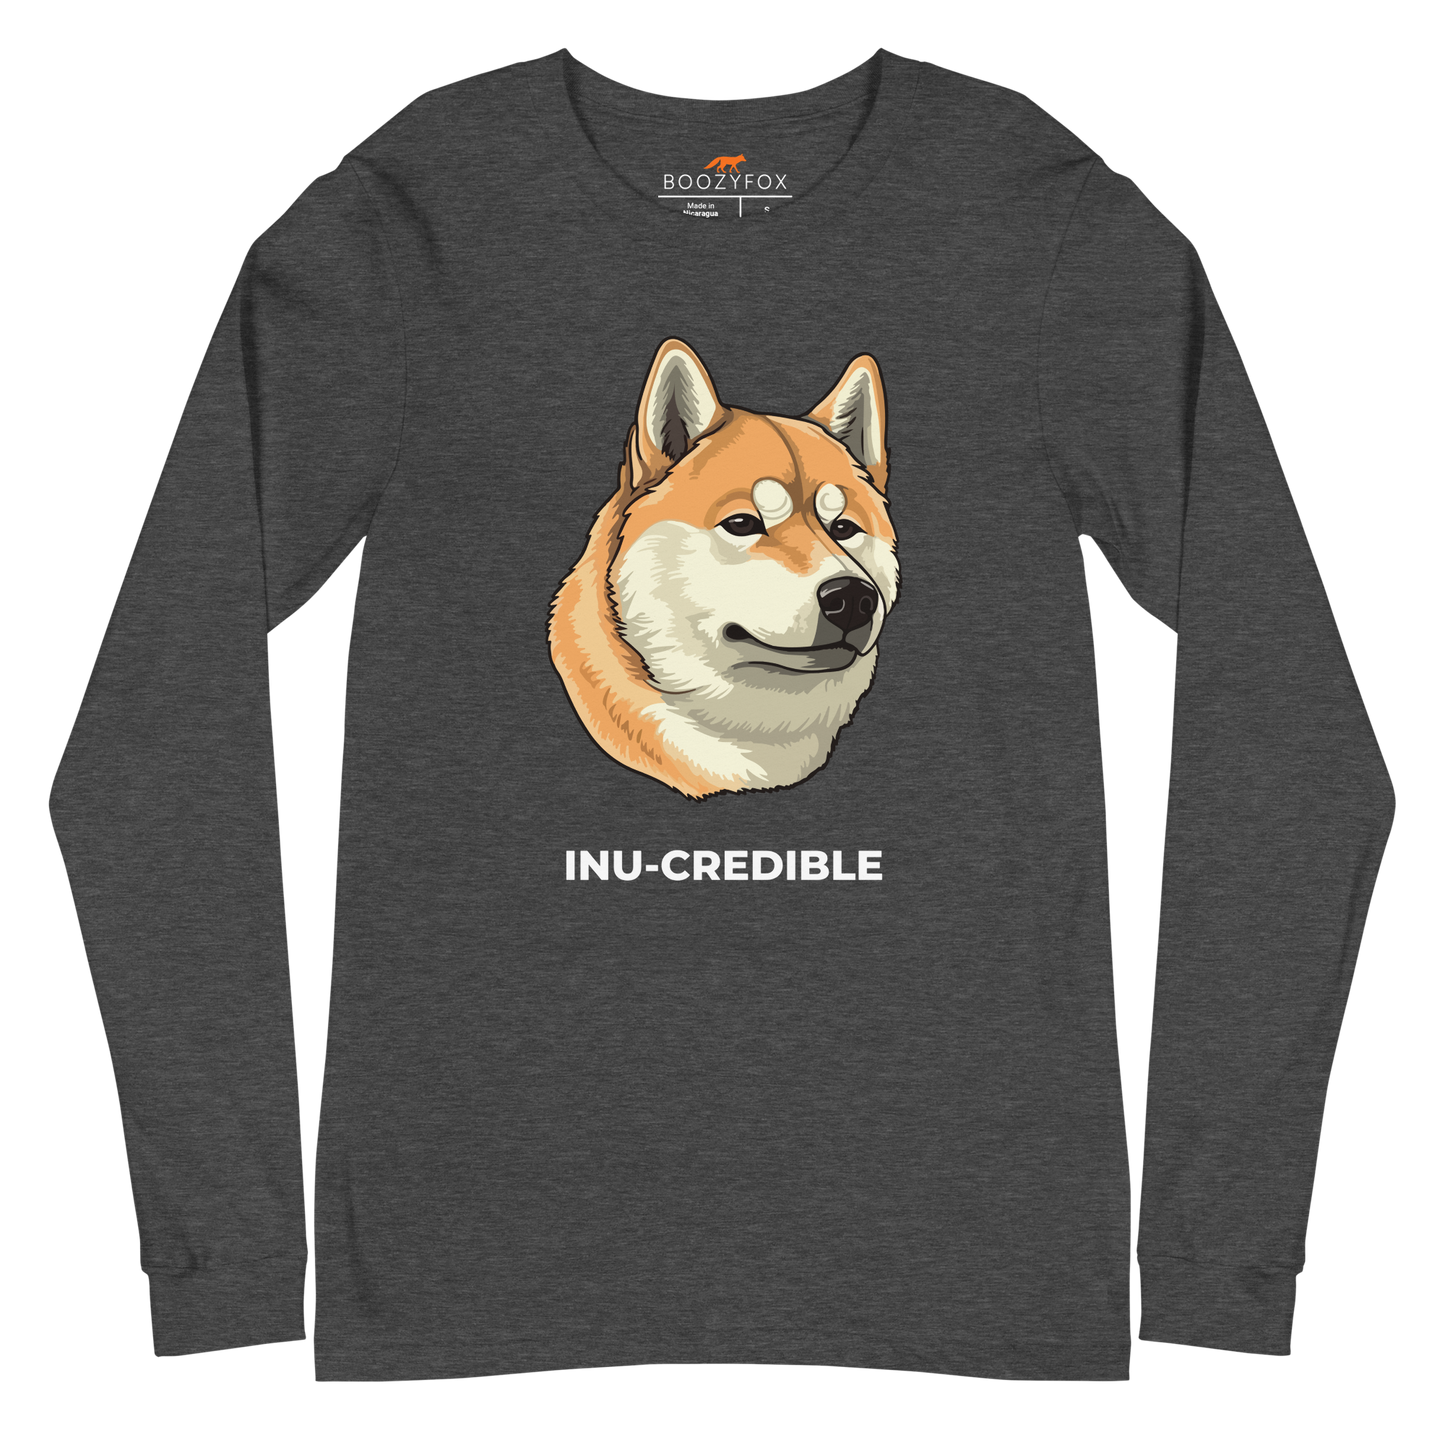 Dark Grey Heather Shiba Inu Long Sleeve Tee featuring the Inu-Credible graphic on the chest - Funny Shiba Inu Long Sleeve Graphic Tees - Boozy Fox